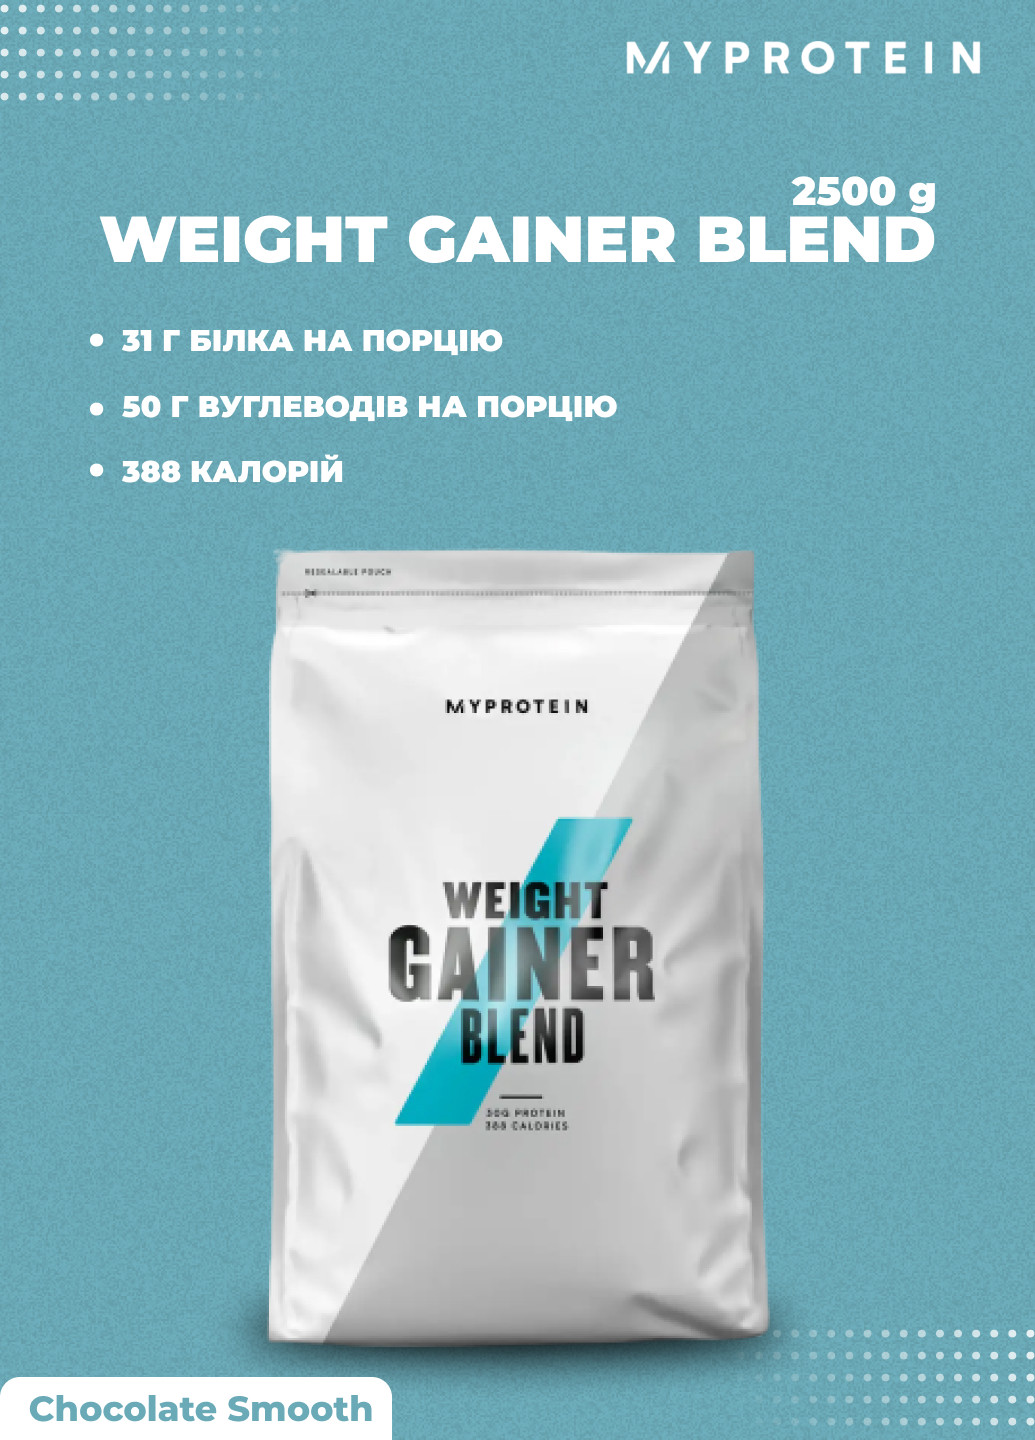 Протеин Weight Gainer Blend - 2500g Chocolate Smooth My Protein (252446663)